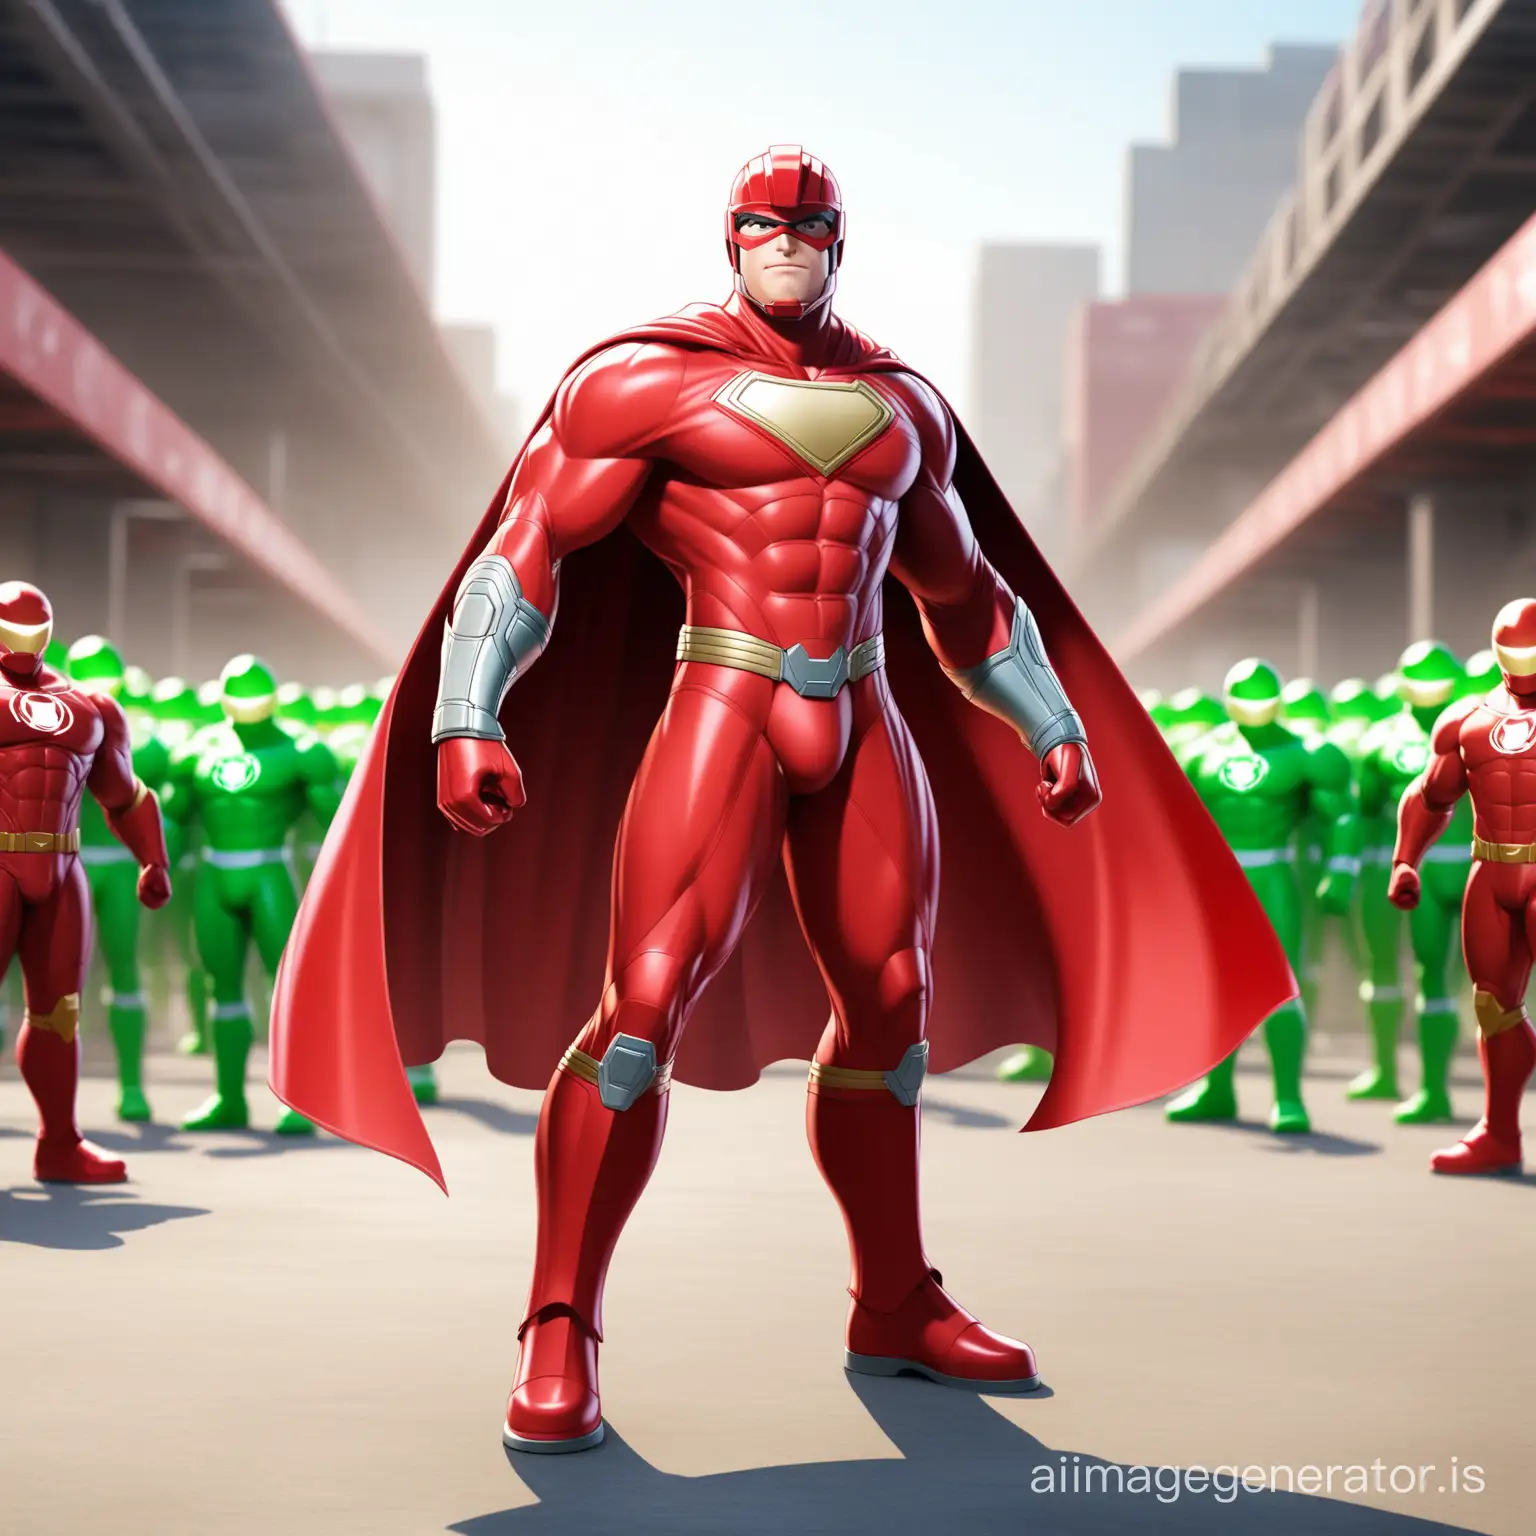 EcoFriendly-Superhero-Squad-with-Red-Cape-and-Helmet-Defending-the-Environment